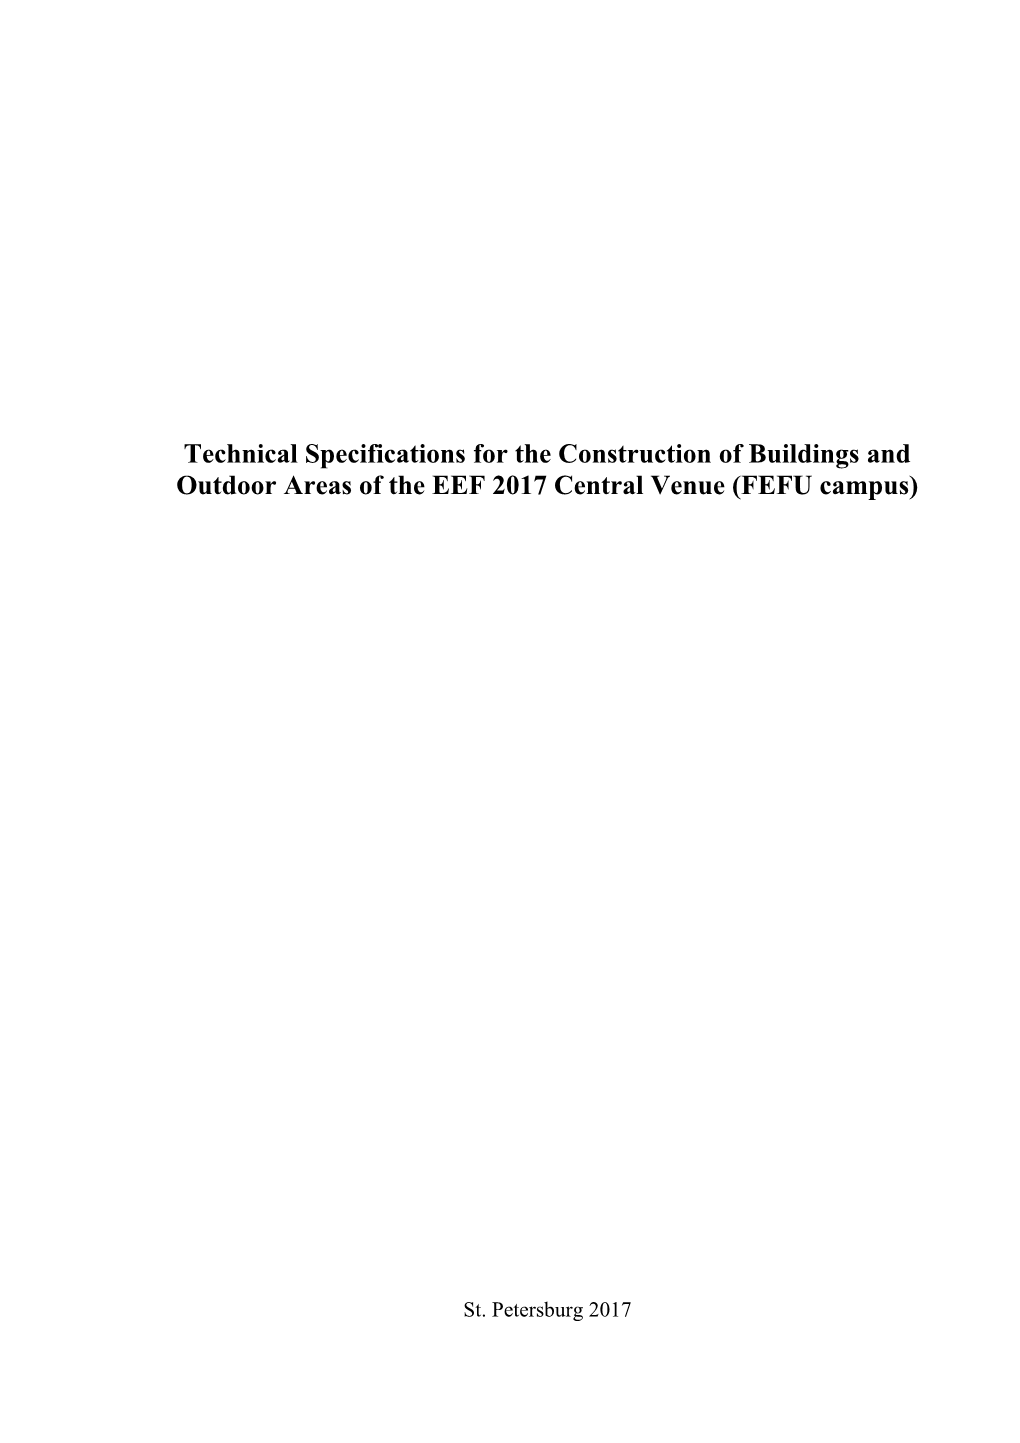 Technical Specifications for the Construction of Buildings and Outdoor Areas of the EEF